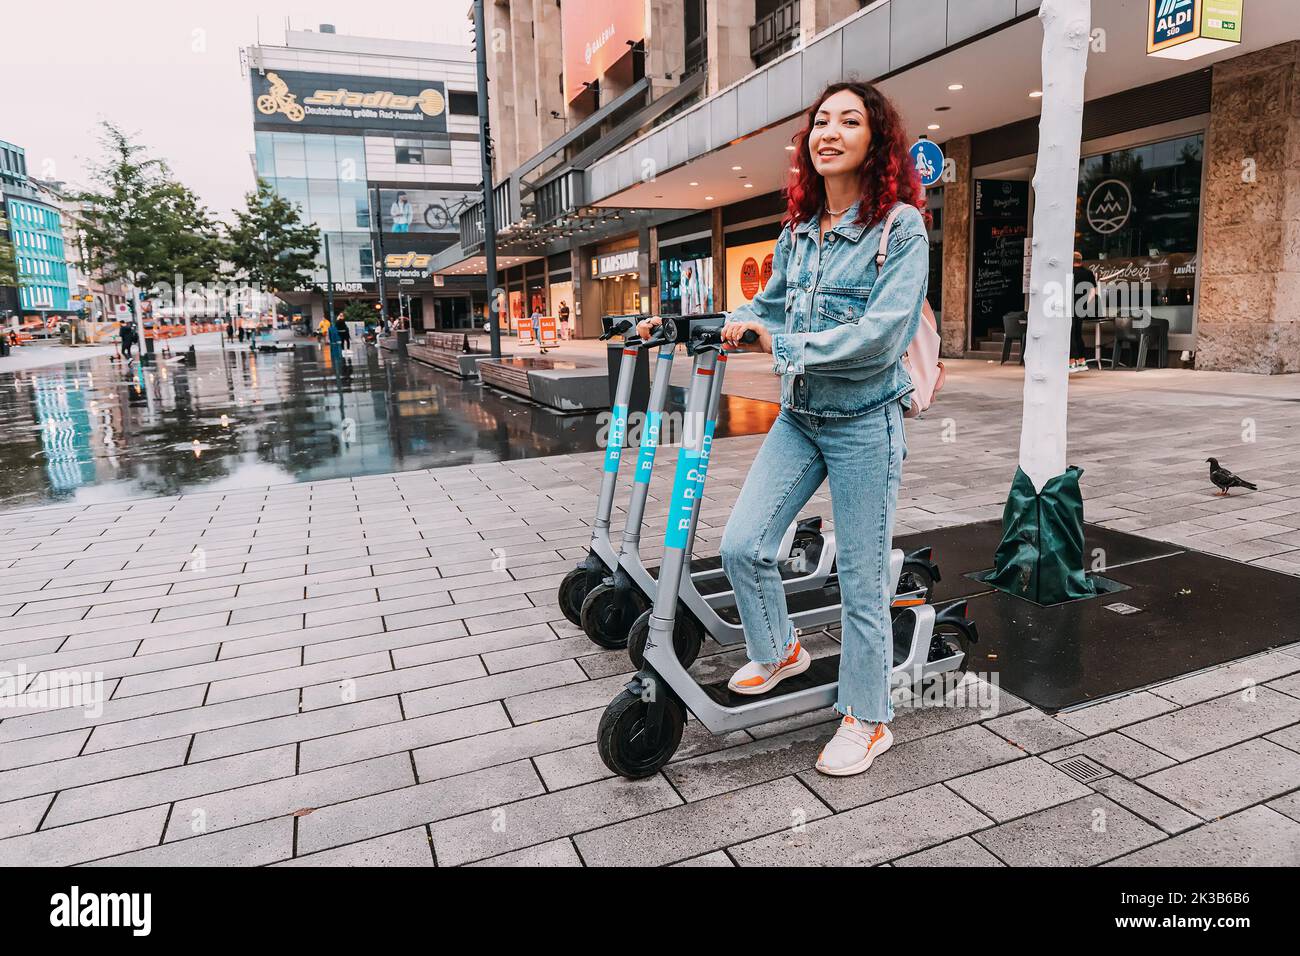 21 July 2022, Dusseldorf, Germany: The girl rents an electric scooter for move around the city. Uses a smartphone app to pay. Choose eco transport Stock Photo